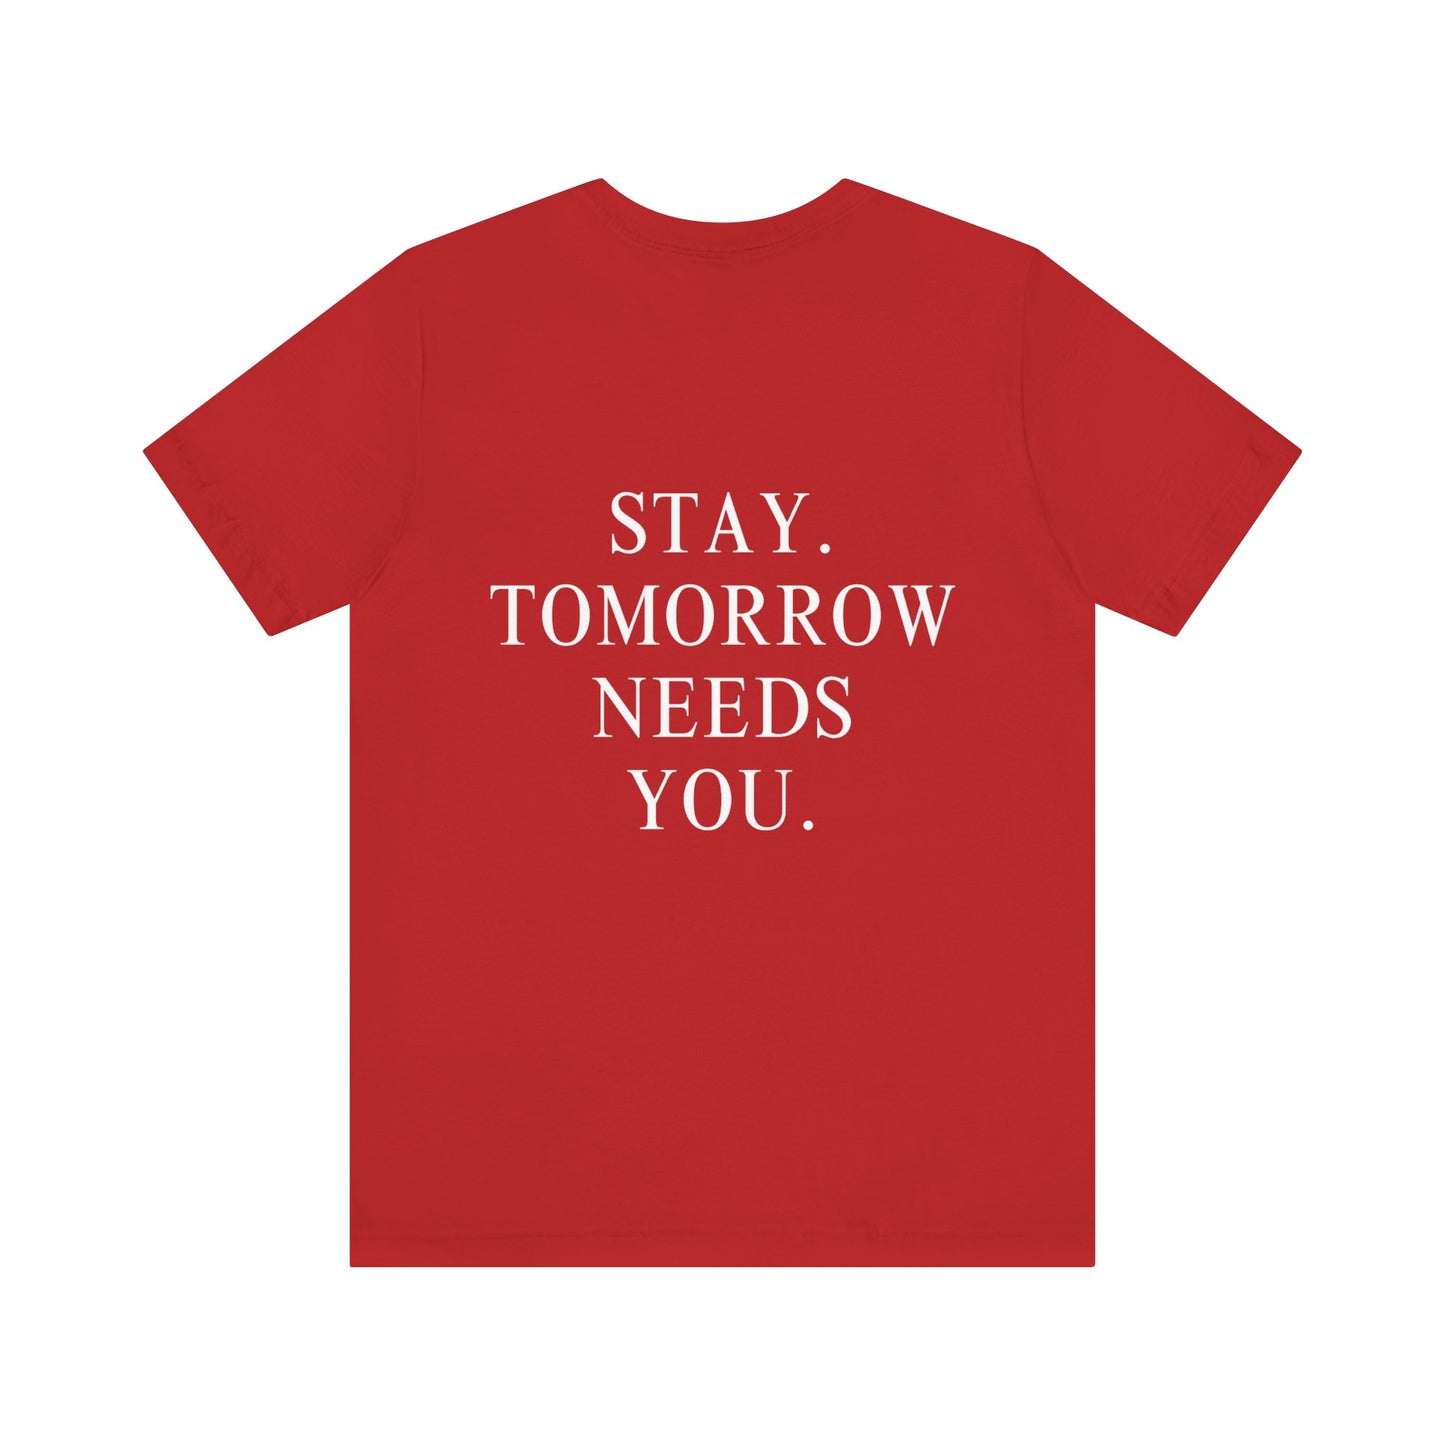 Stay Tomorrow Needs You Suicide Prevention Mental Health Awareness T Shirt, Mothers Day, Fathers Day, Military Gift, Veterans Mental Health Support, Gift Idea TikTok - Stay Tomorrow Needs You Stay Tomorrow Needs You Suicide Prevention Mental Health Awareness T Shirt, Mothers Day, Fathers Day, Military Gift, Veterans Mental Health Support, Gift Idea TikTok